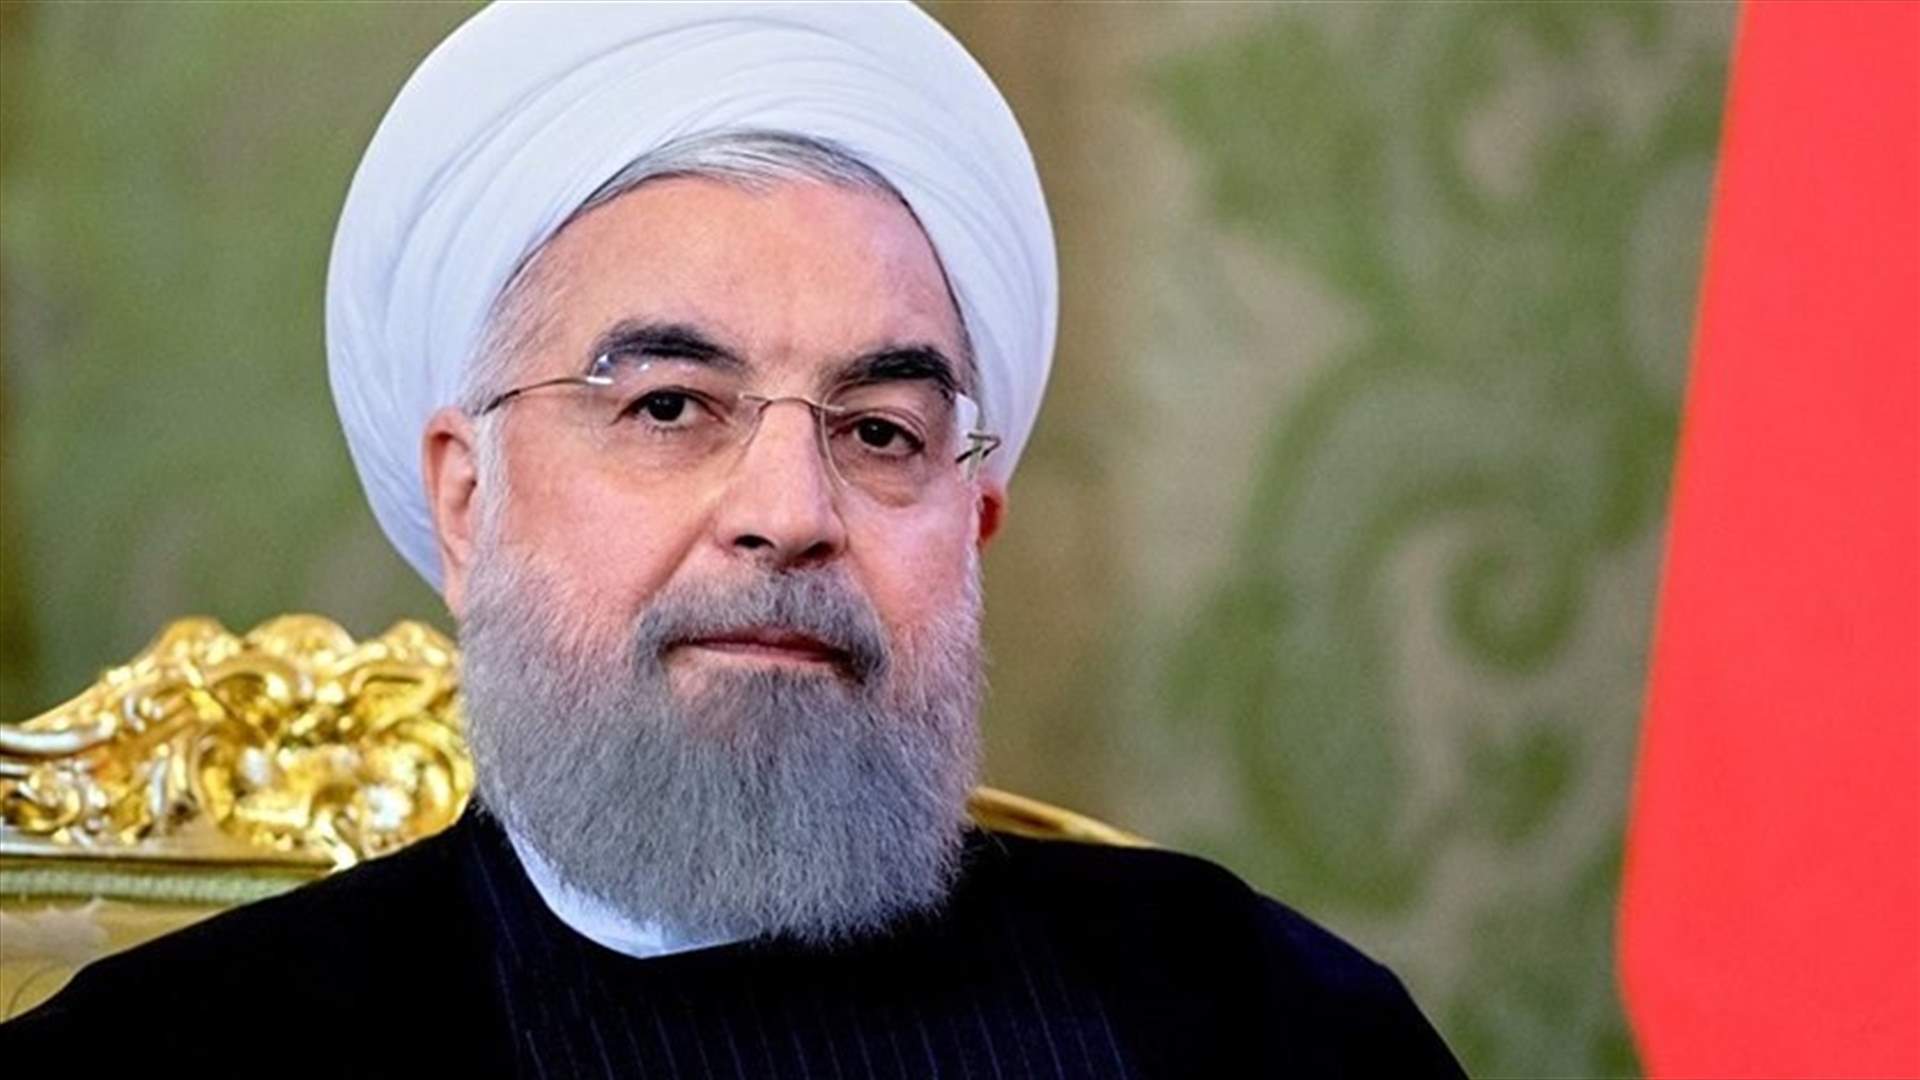 Iran will not wage war against any nation - Iranian president